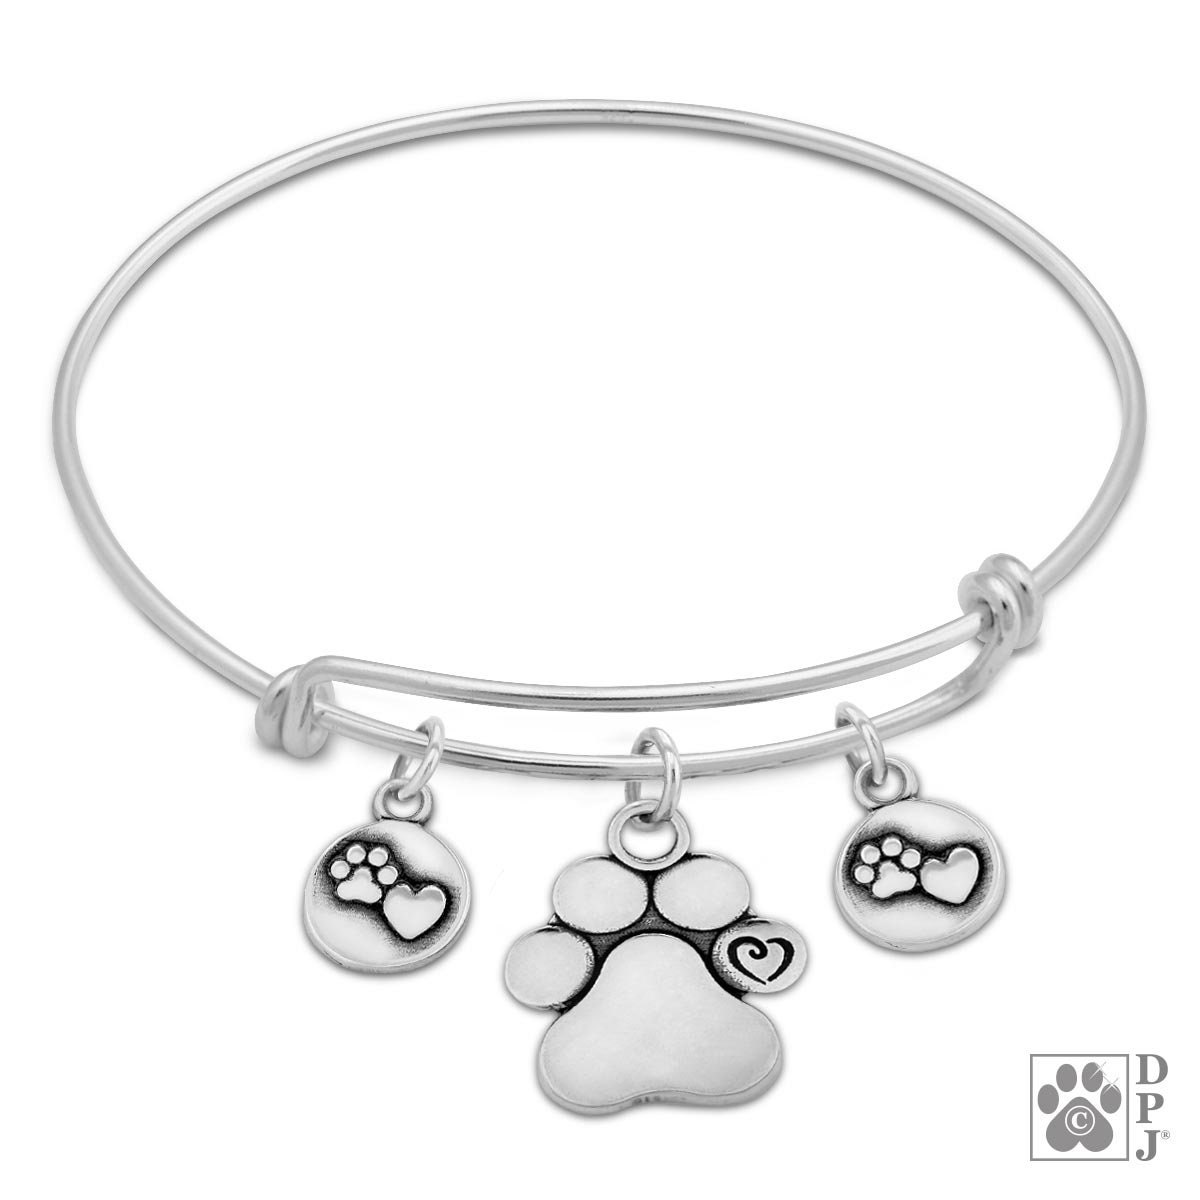 Adjustable Paw Heart Charm Bracelet Jewelry Gifts and Accessoriesthumbnail